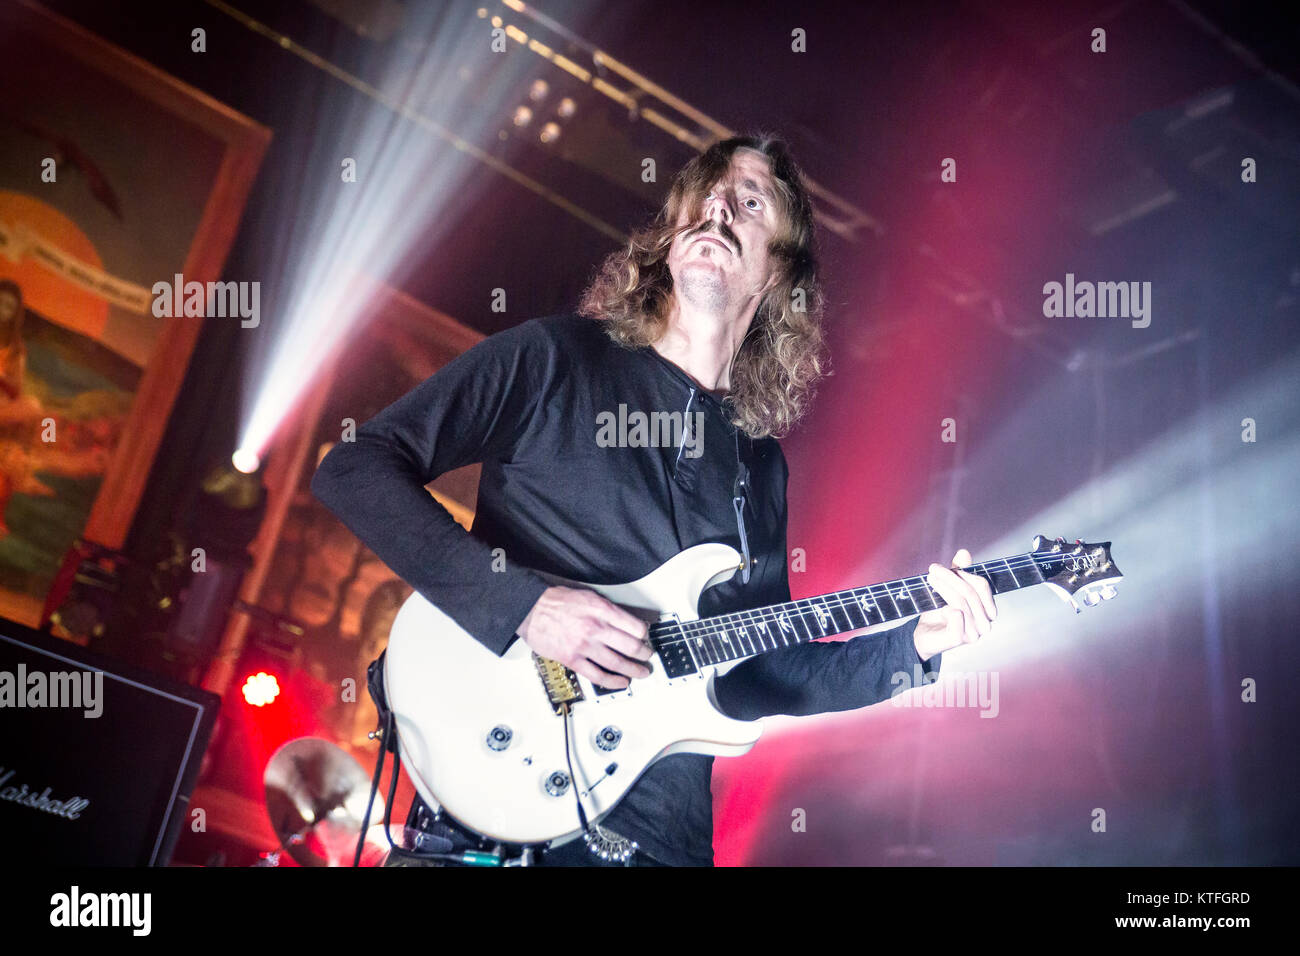 The progressive Swedish death metal band Opeth performs a live concert at Sentrum Scene in Oslo. Here vocalist and guitarist Mikael Åkerfeldt is seen live on stage. Norway, 14/11 2014. Stock Photo